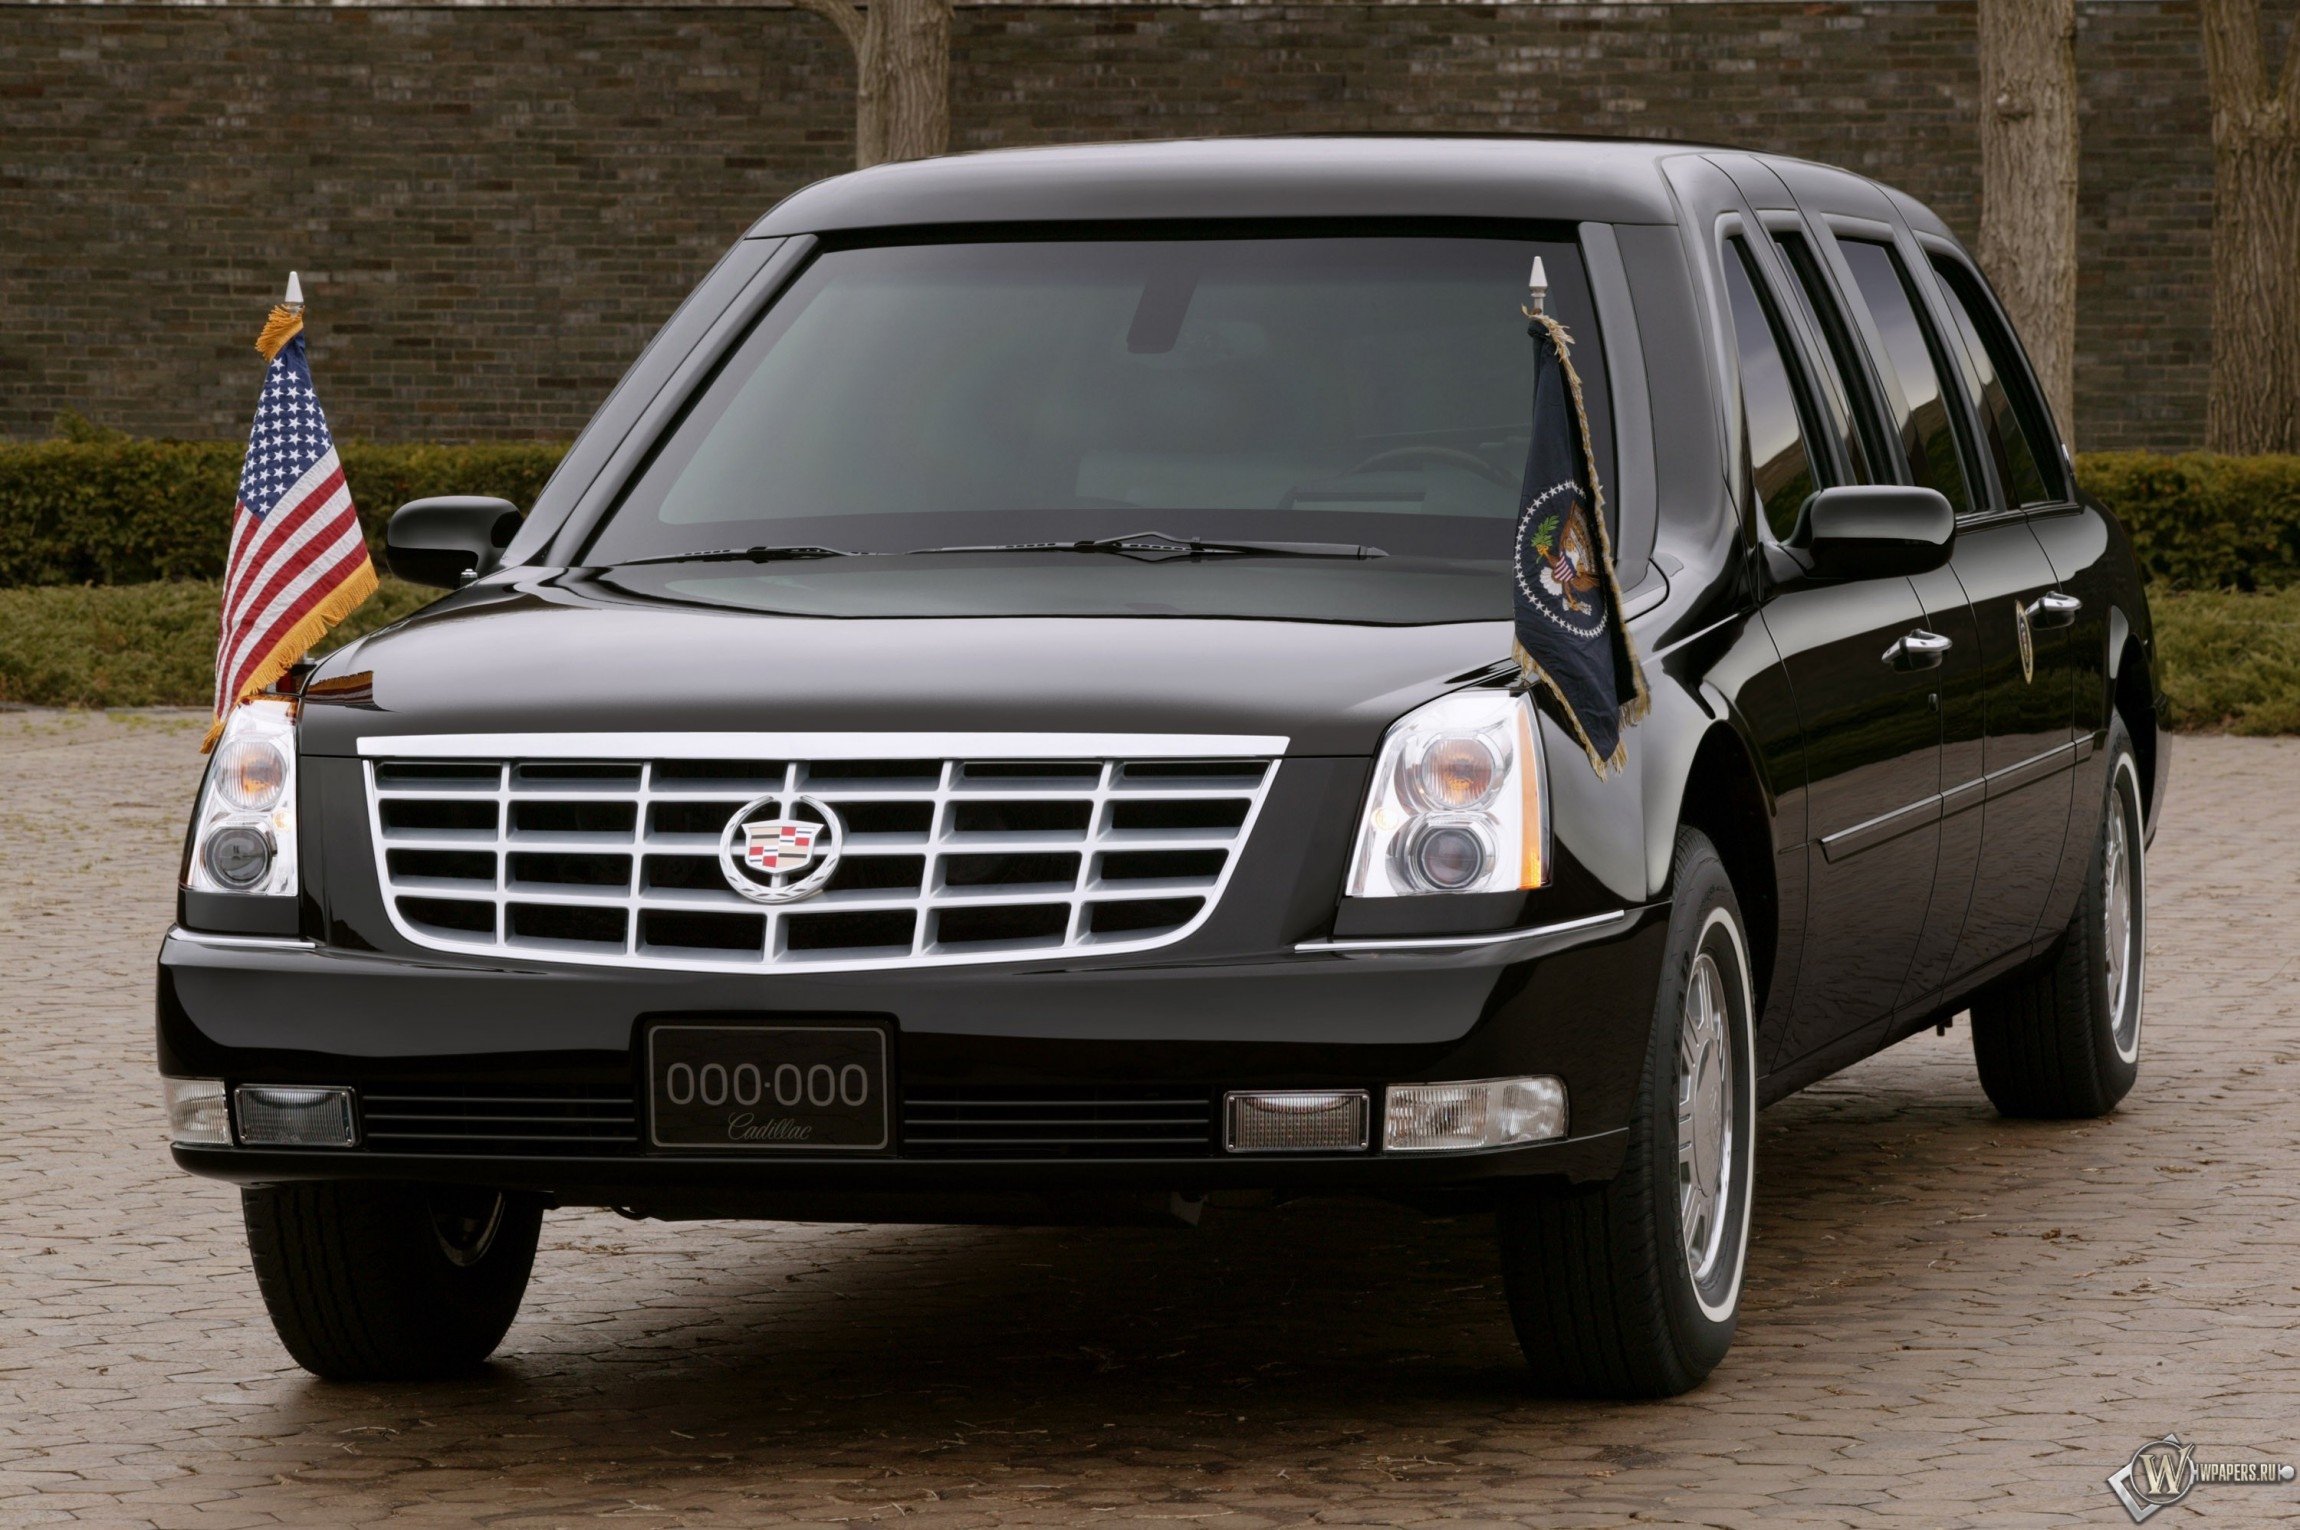 State cars. Cadillac DTS presidential Limousine 2006. Cadillac 2005 presidential. Кадиллак DTS. Кадиллак ДТС 2005.